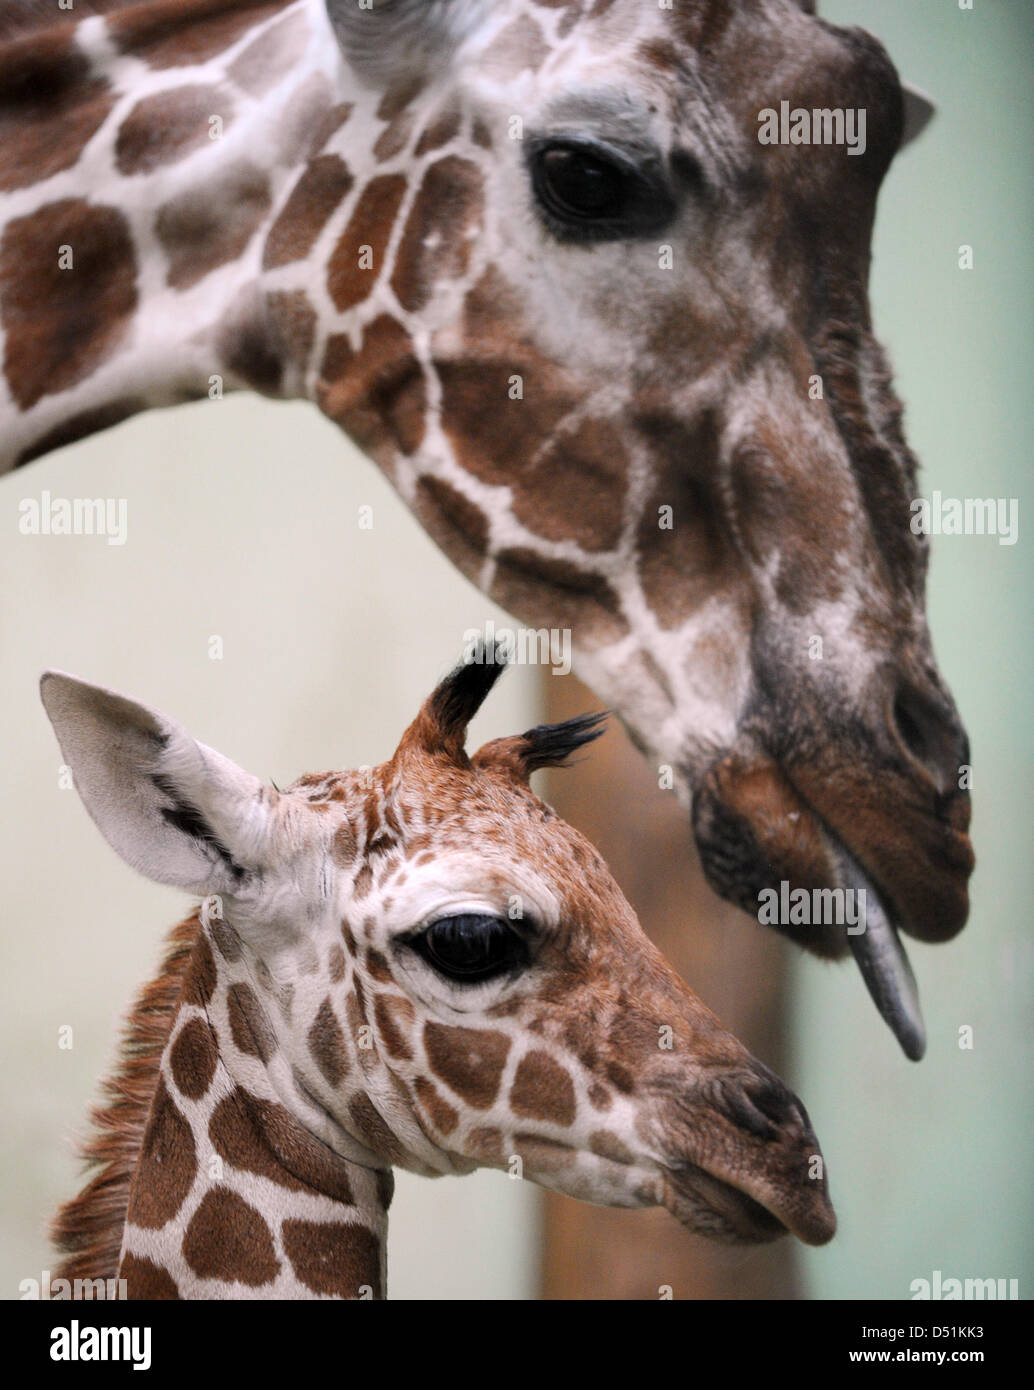 The male baby reticulated giraffe 'Tebogo' being licked by his mother 'Monique' at his presentation at the zoo in Frankfurt Main, 22 December 2010. At his birth he was 1.70 meters tall and weighed 85 kilograms. This is the seventh birth for the newborn giraffe's mother. Photo: Arne Dedert Stock Photo